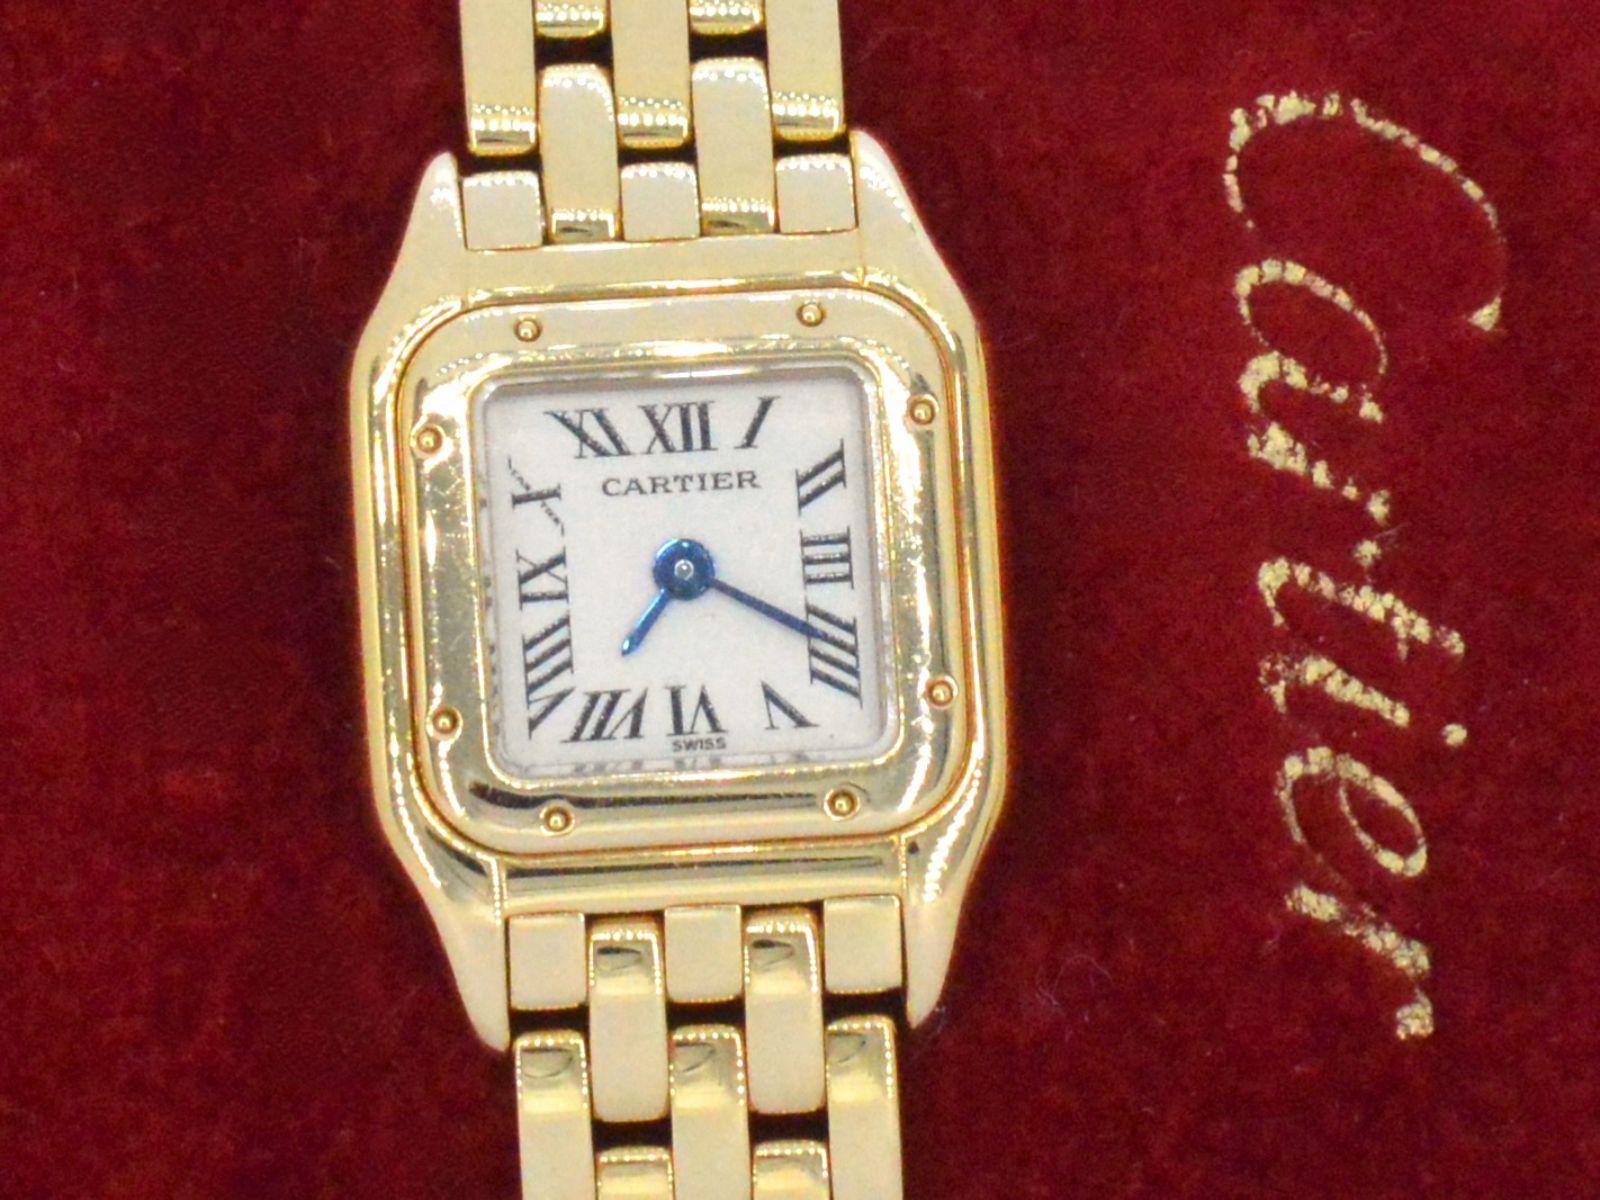 Brand: Cartier
 Model: Panther mini
 Year: est. 2009
 Type number: 358412MG
 Dial: cream white with Roman numerals

Jewel: Watch
 Type: quartz
 Weight: 45.1 grams
 Dimensions: 25x19mm
 Length: 17 cm
 Hallmark: 18K gold 750
 Condition: Excellent
